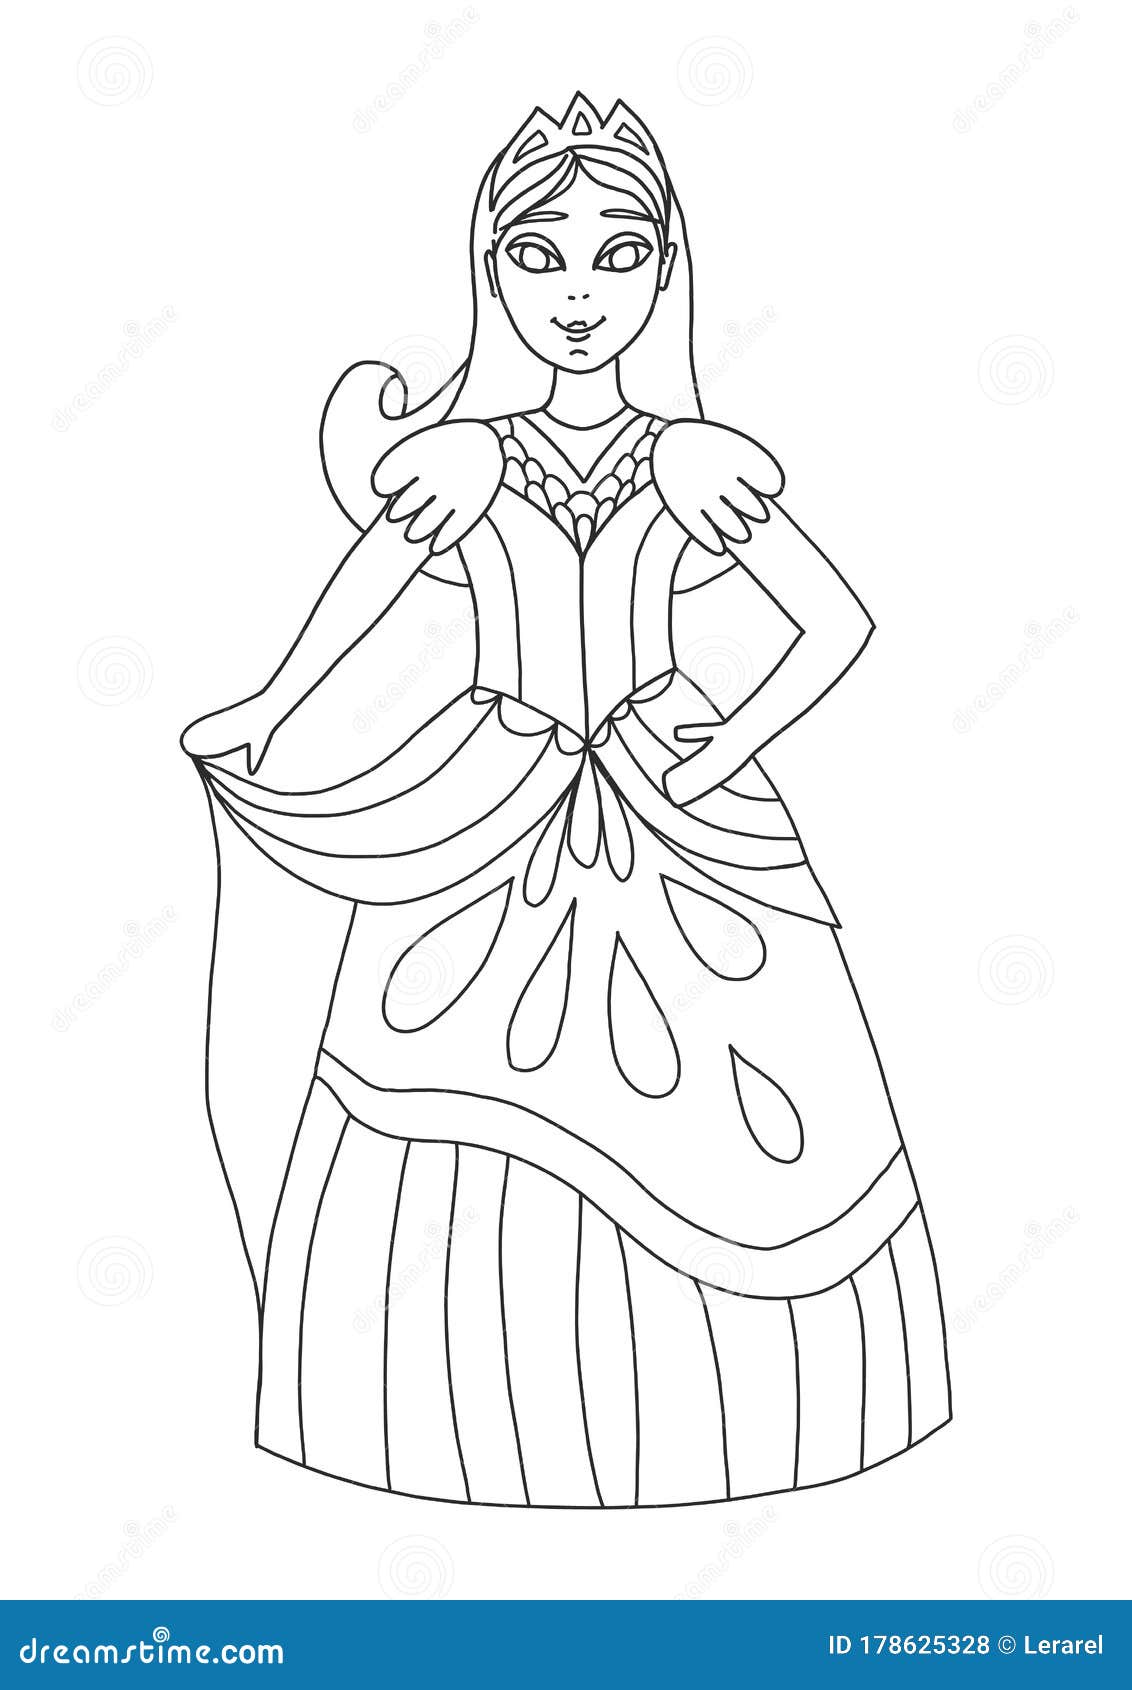 Coloring Book for Adults and Children with a Princess or Queen ...